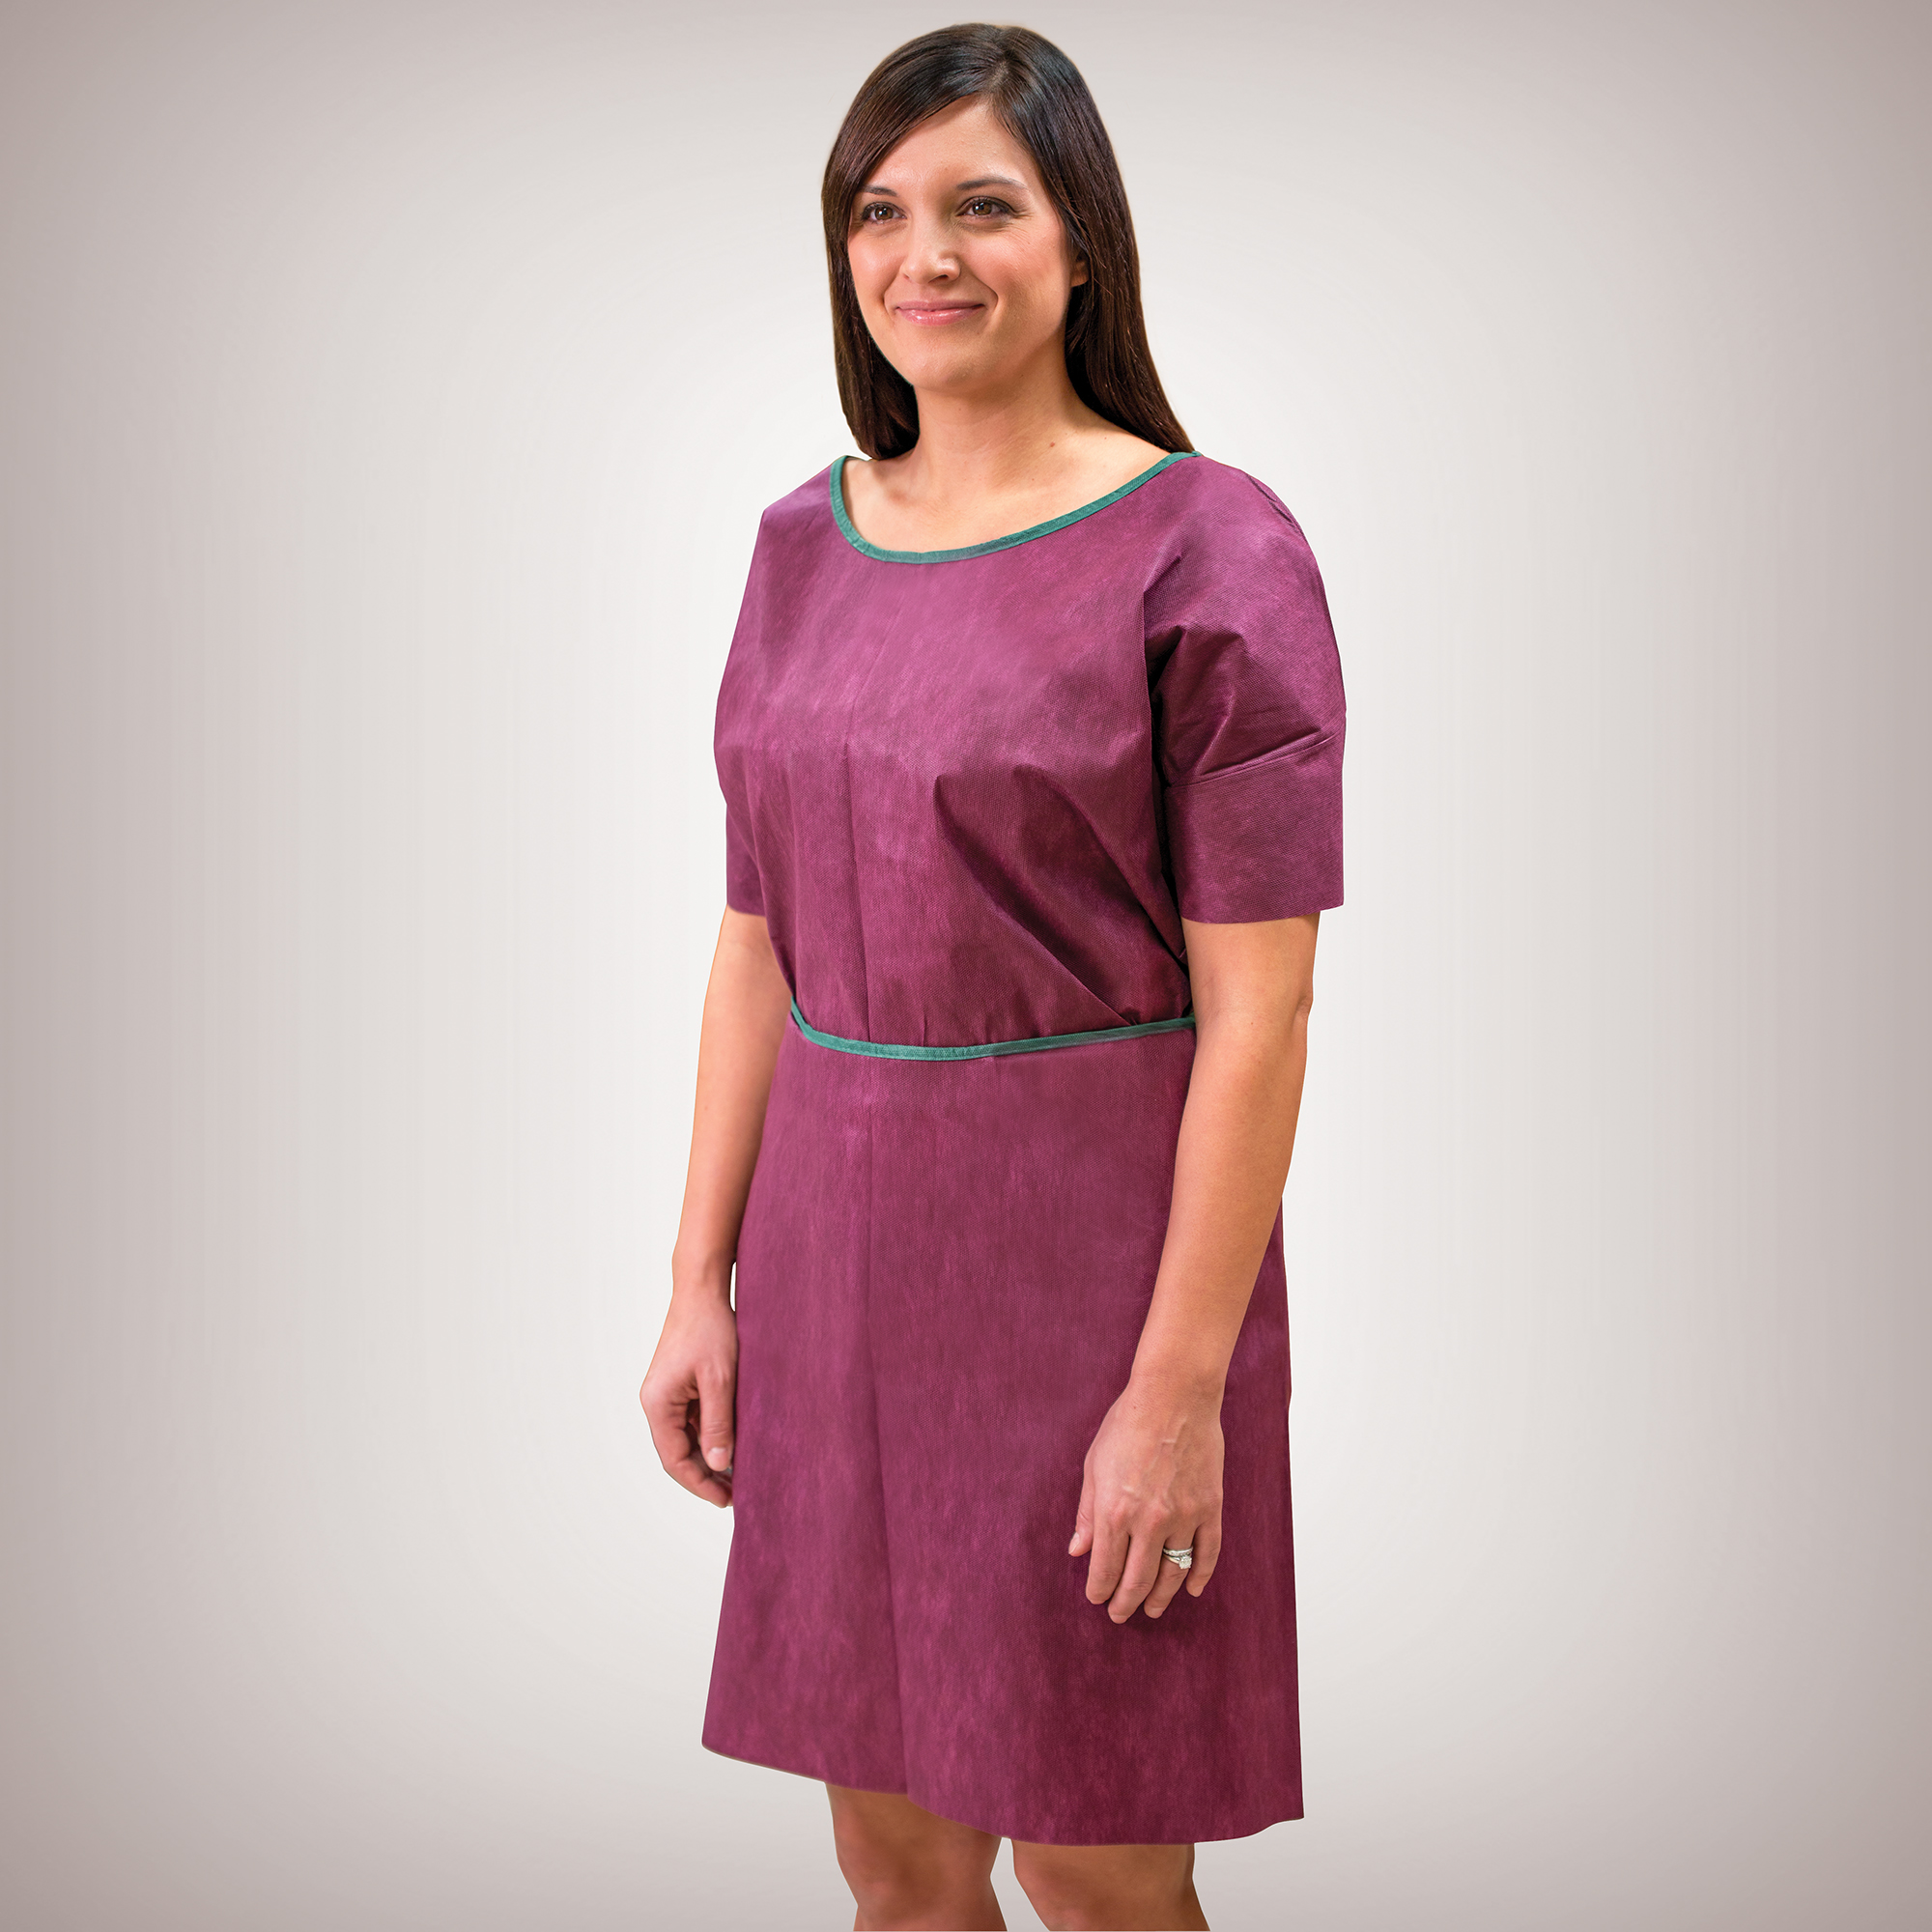 Graham Medical® Non-woven SMS Exam Gowns (Maroon)